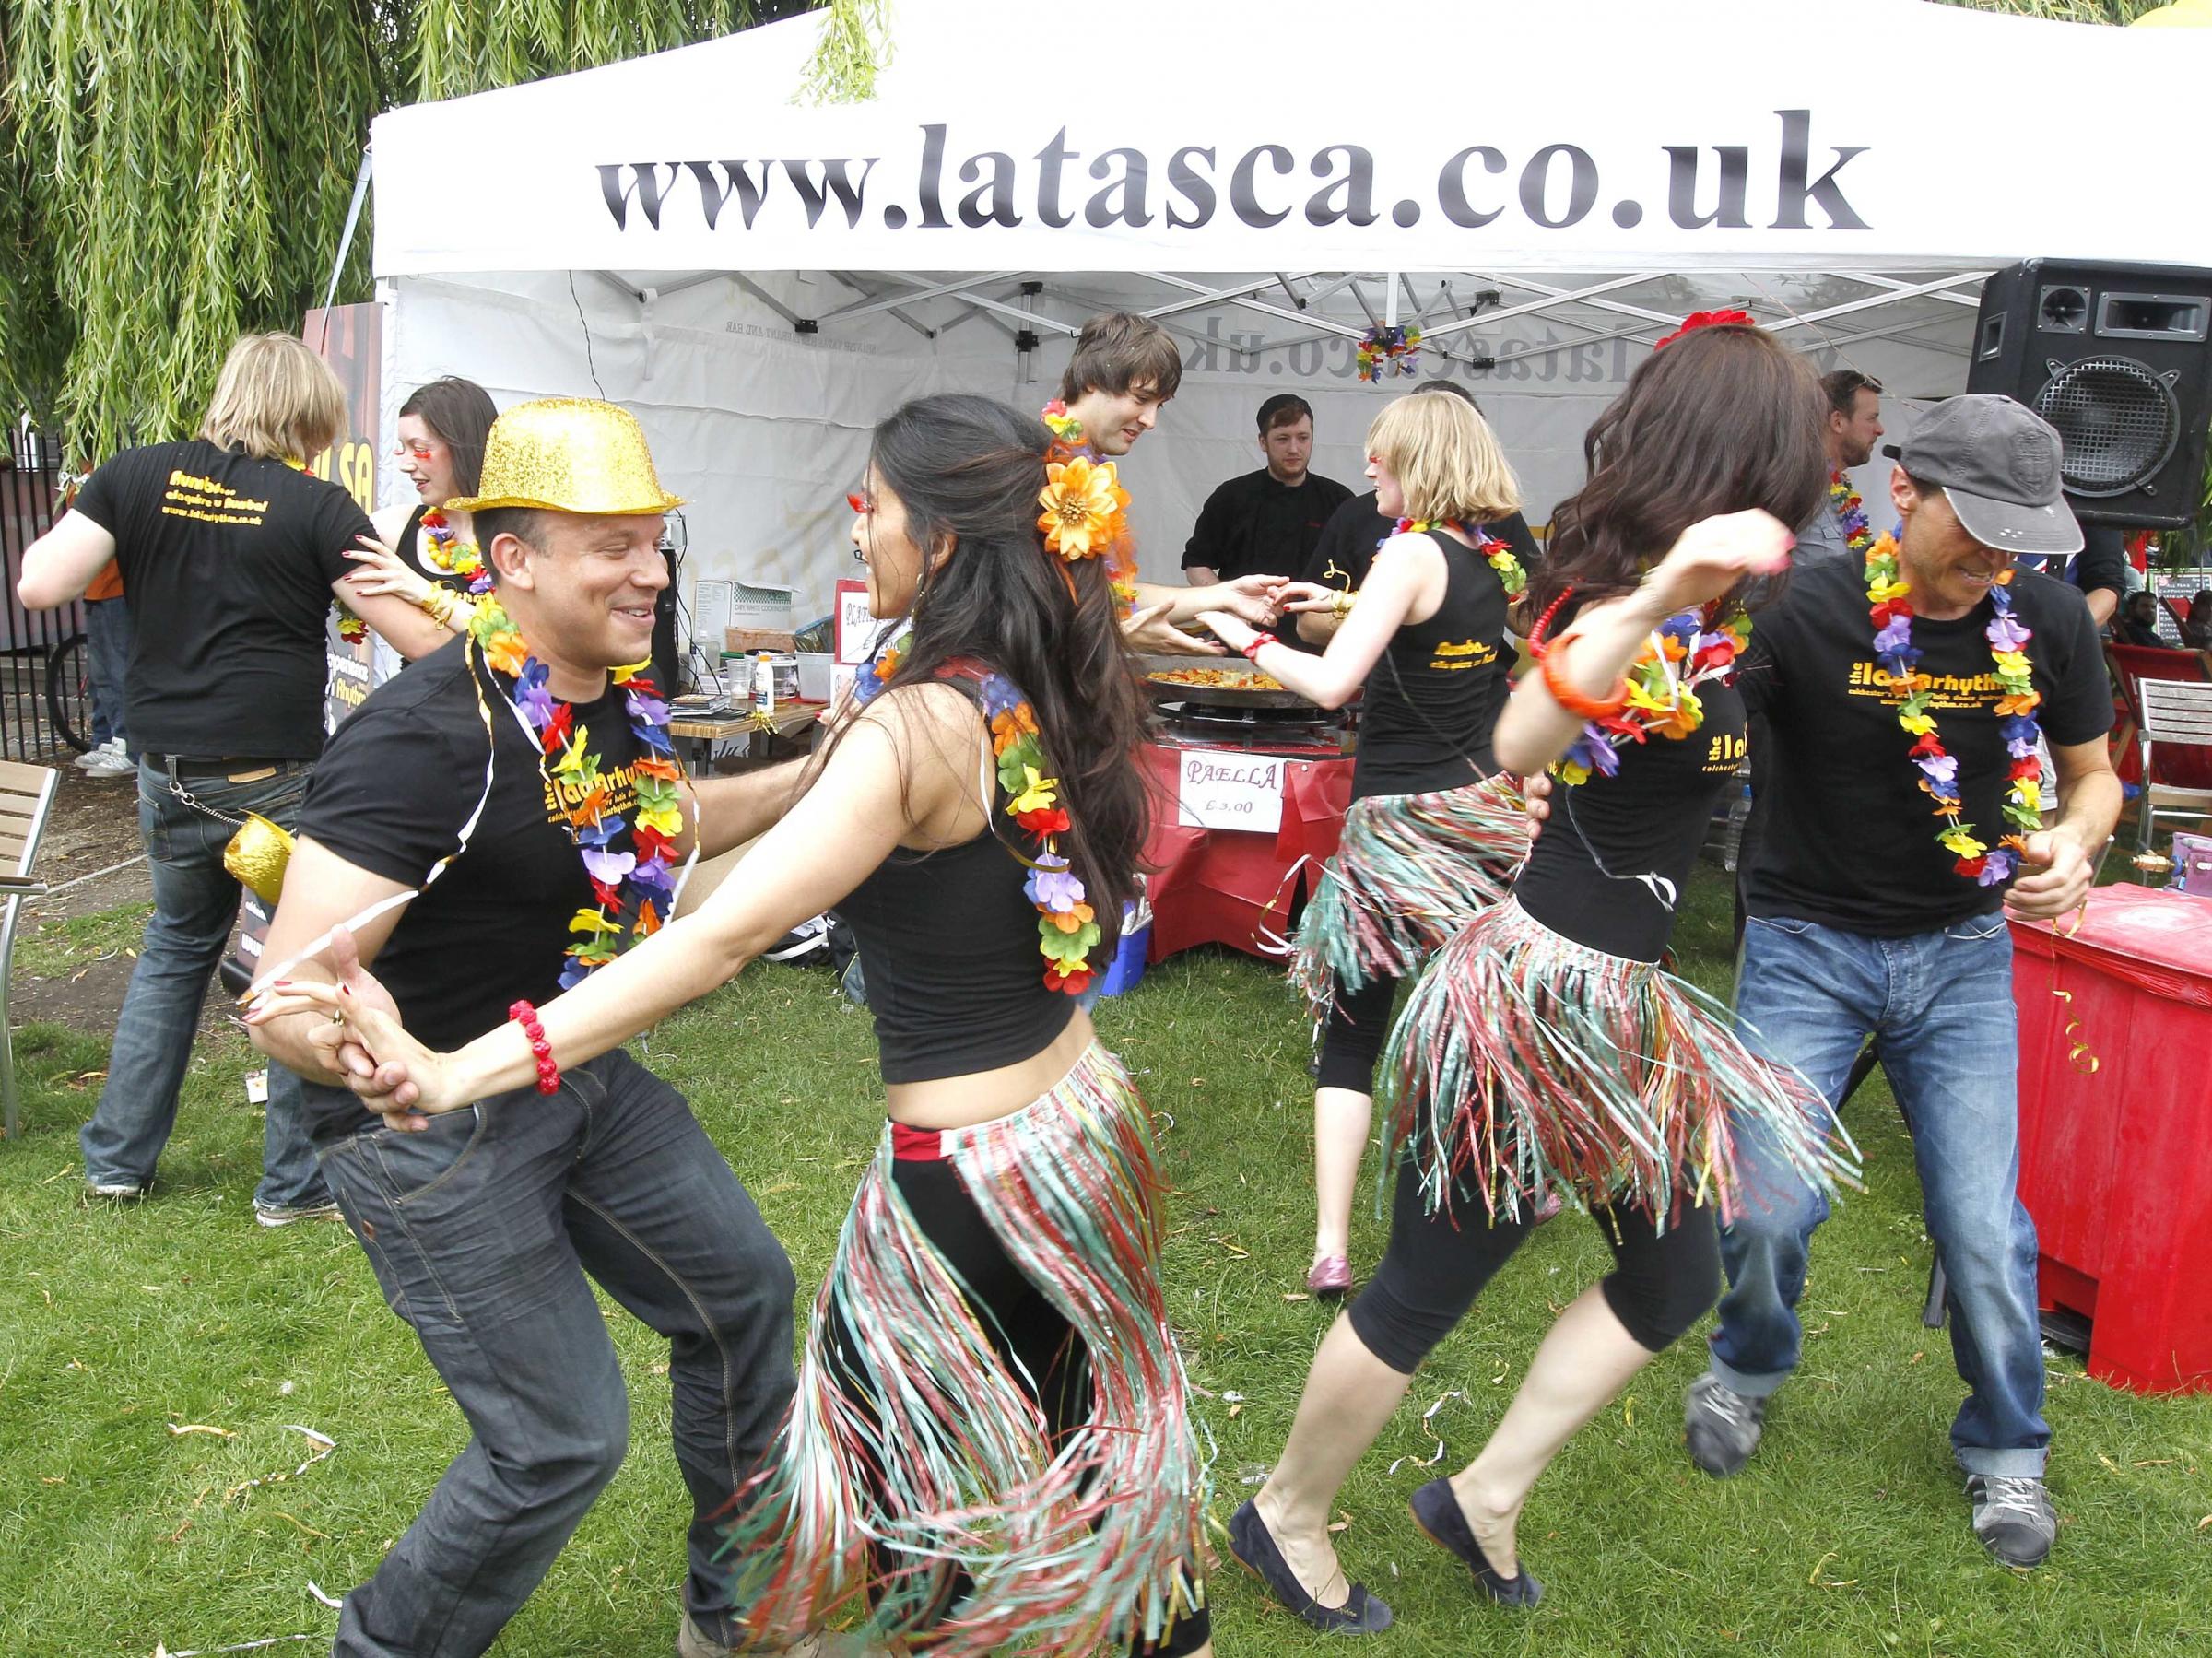 Moving to the music - people dance around the tables at the La Tasca stand